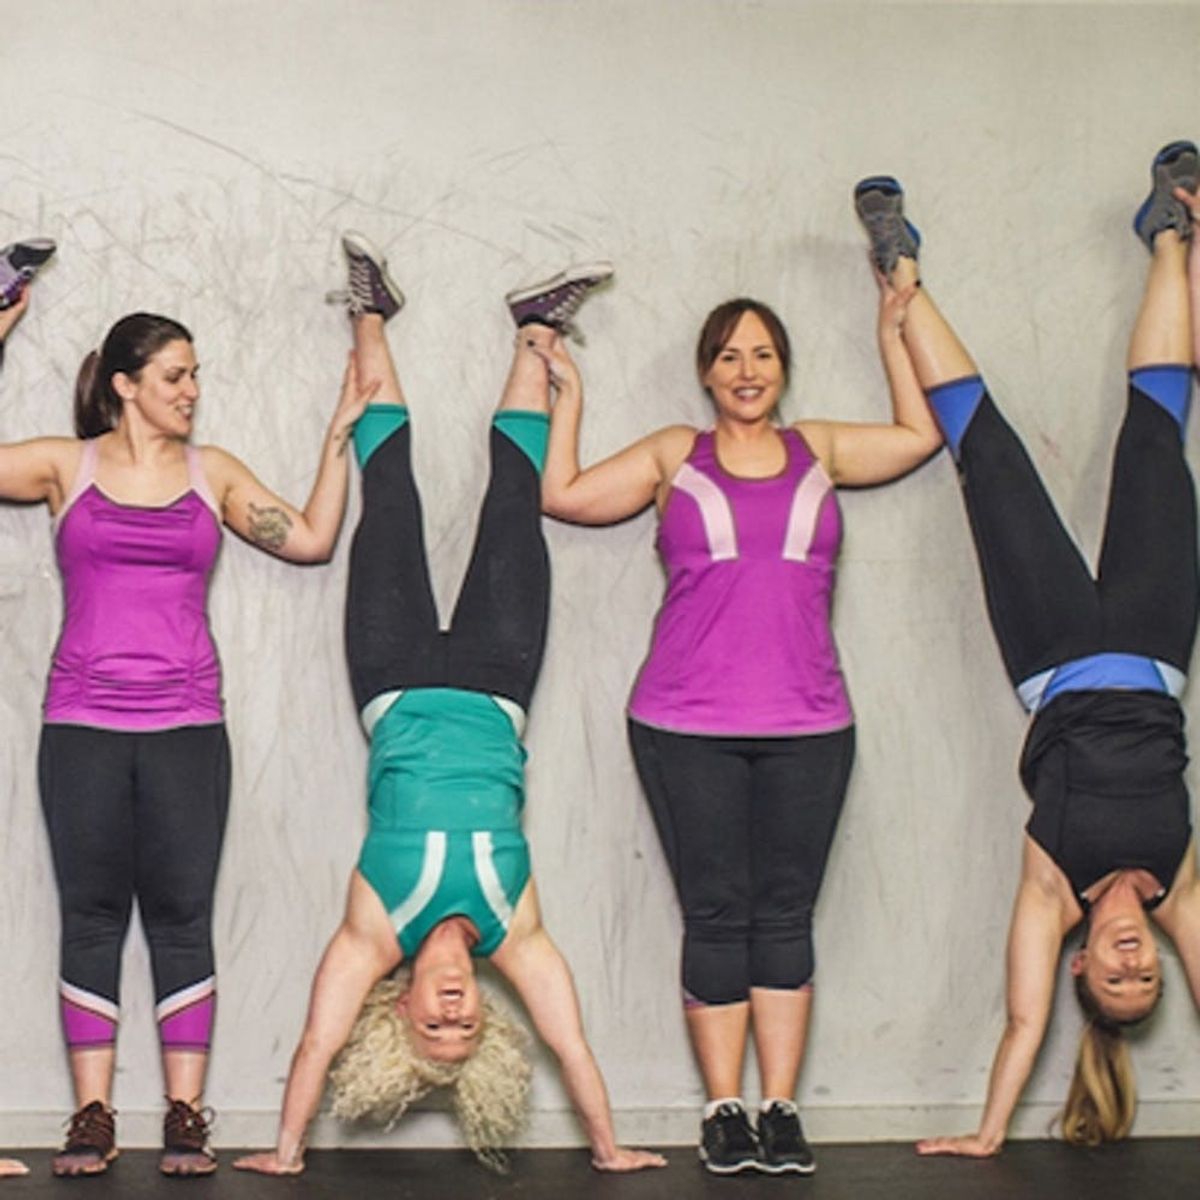 How This Fitness Company Is Putting an End to Size Shaming